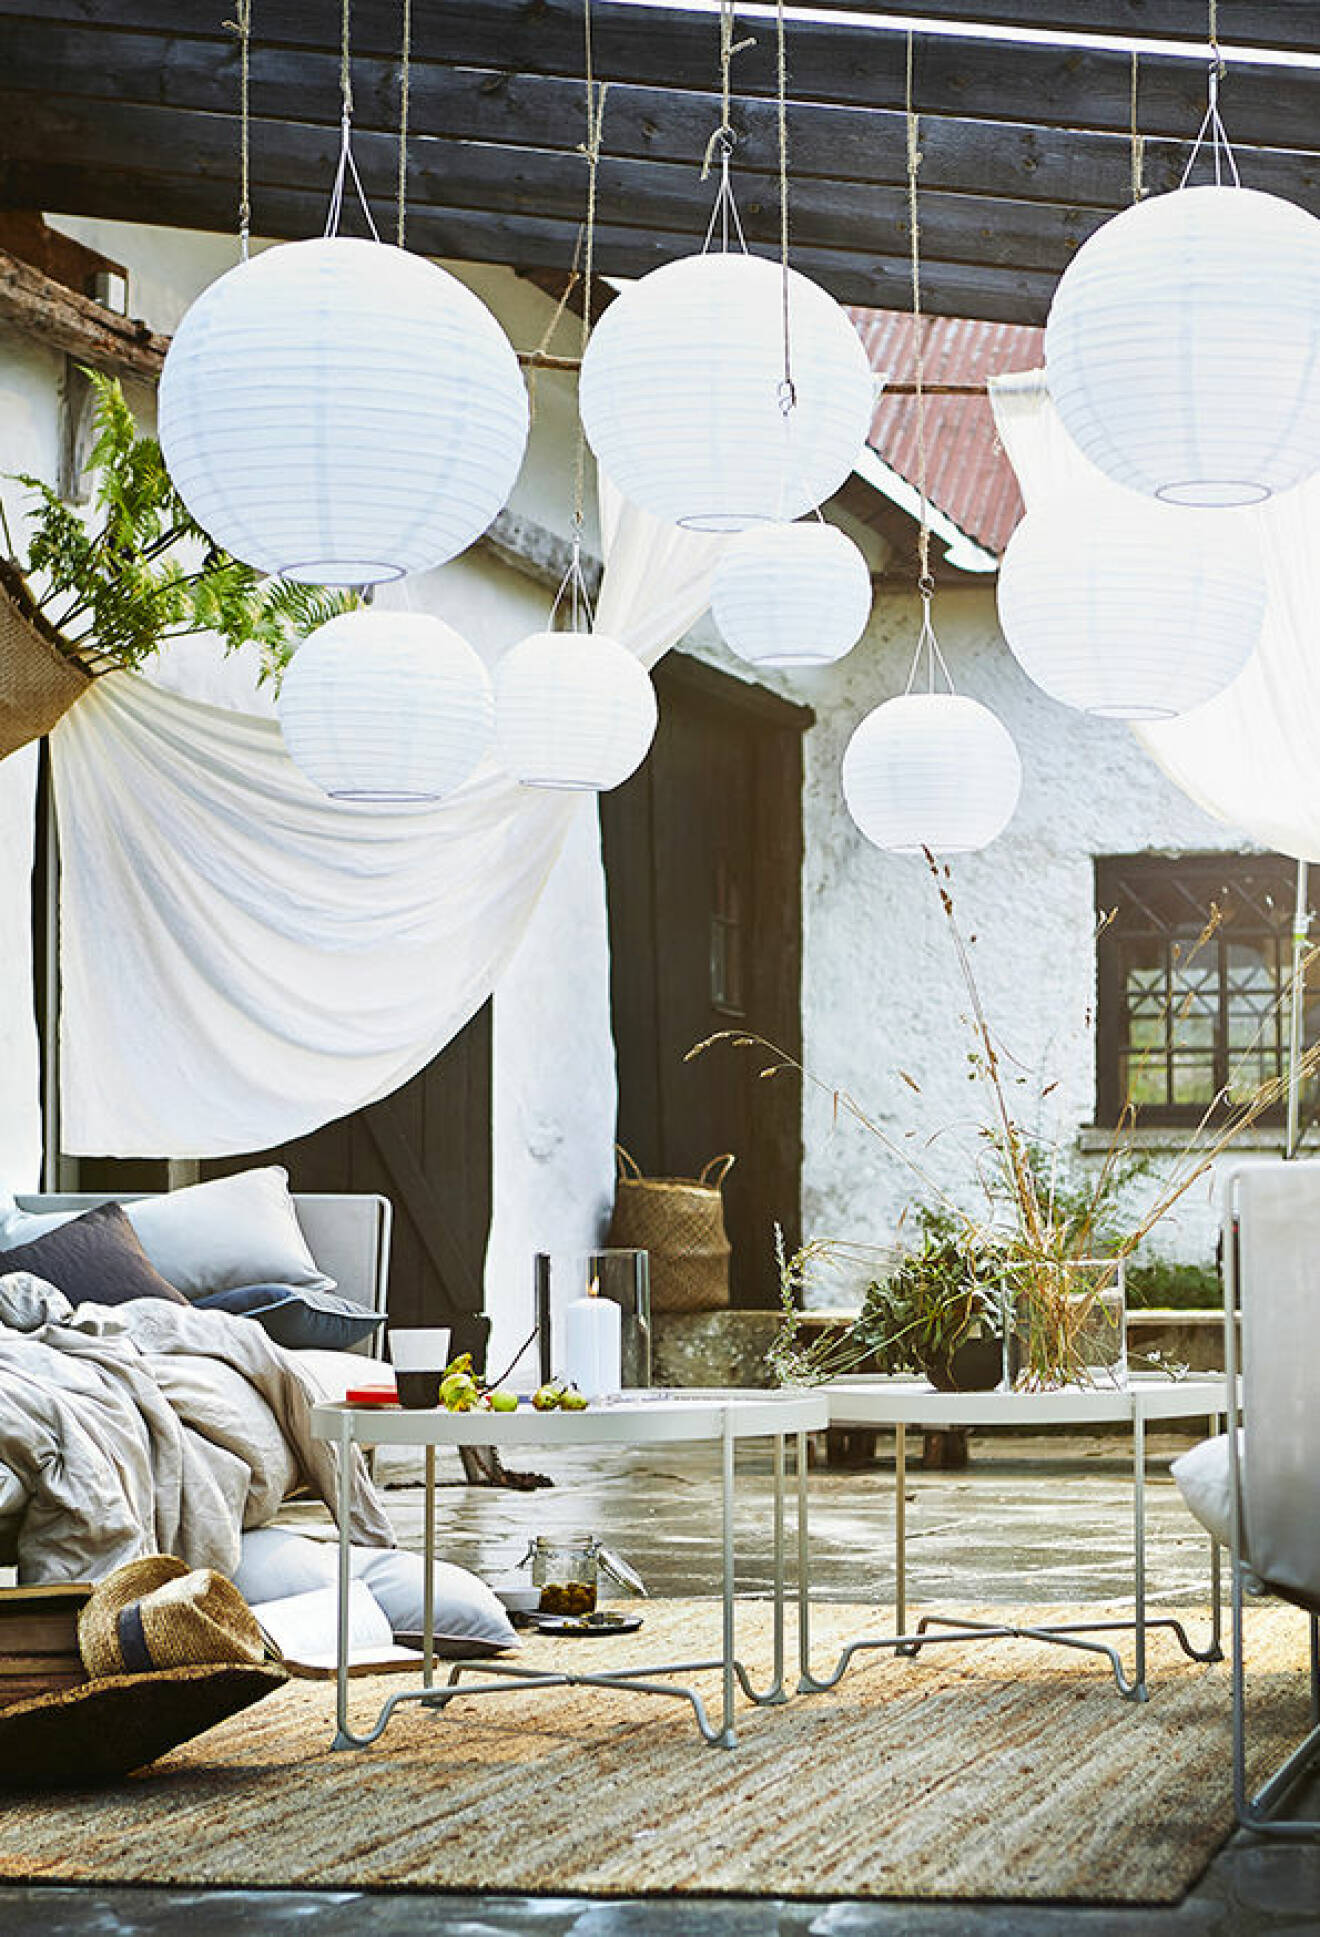 Cosy outdoor space with furniture and lamps in the ceiling.